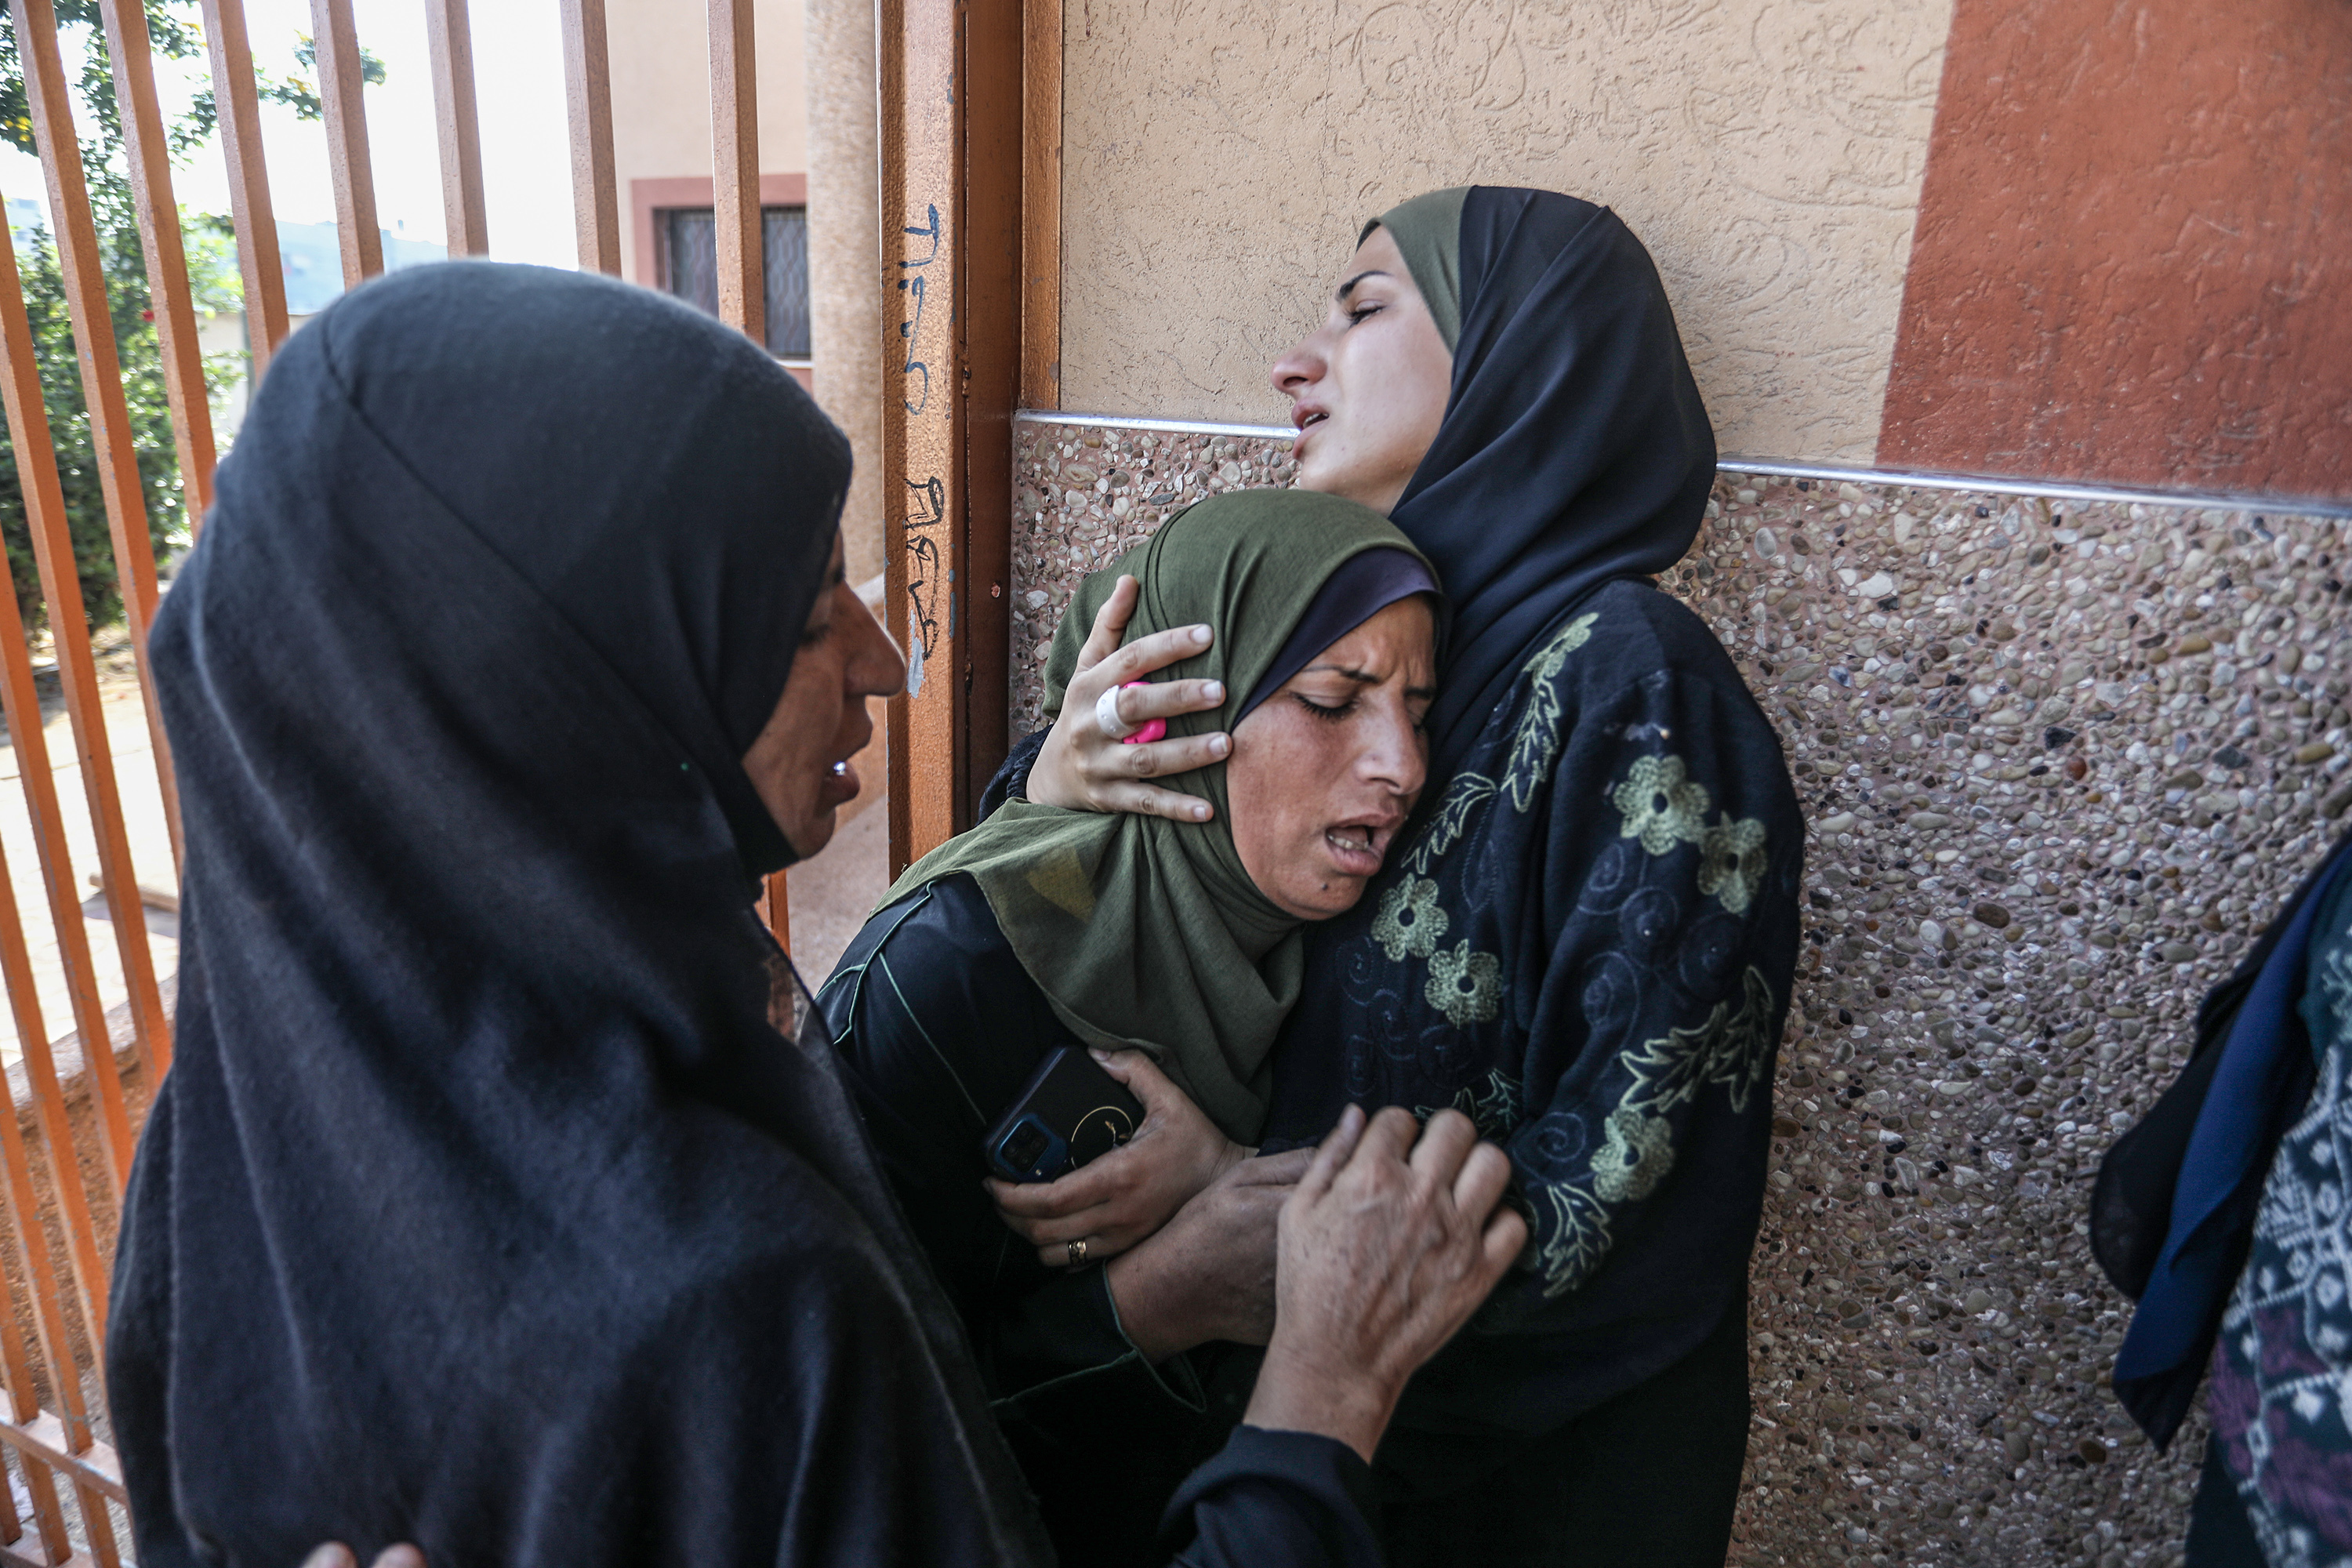 KHAN YUNIS, GAZA - JULY 24: Relatives of Palestinians, who lost their lives following the Israeli attack on Khan Yunis, mourn as dead bodies are taken from the morgue at Nasser Hospital for burial in Khan Yunis, Gaza on July 24, 2024. (Photo by Abed Rahim Khatib/Anadolu via Getty Images)